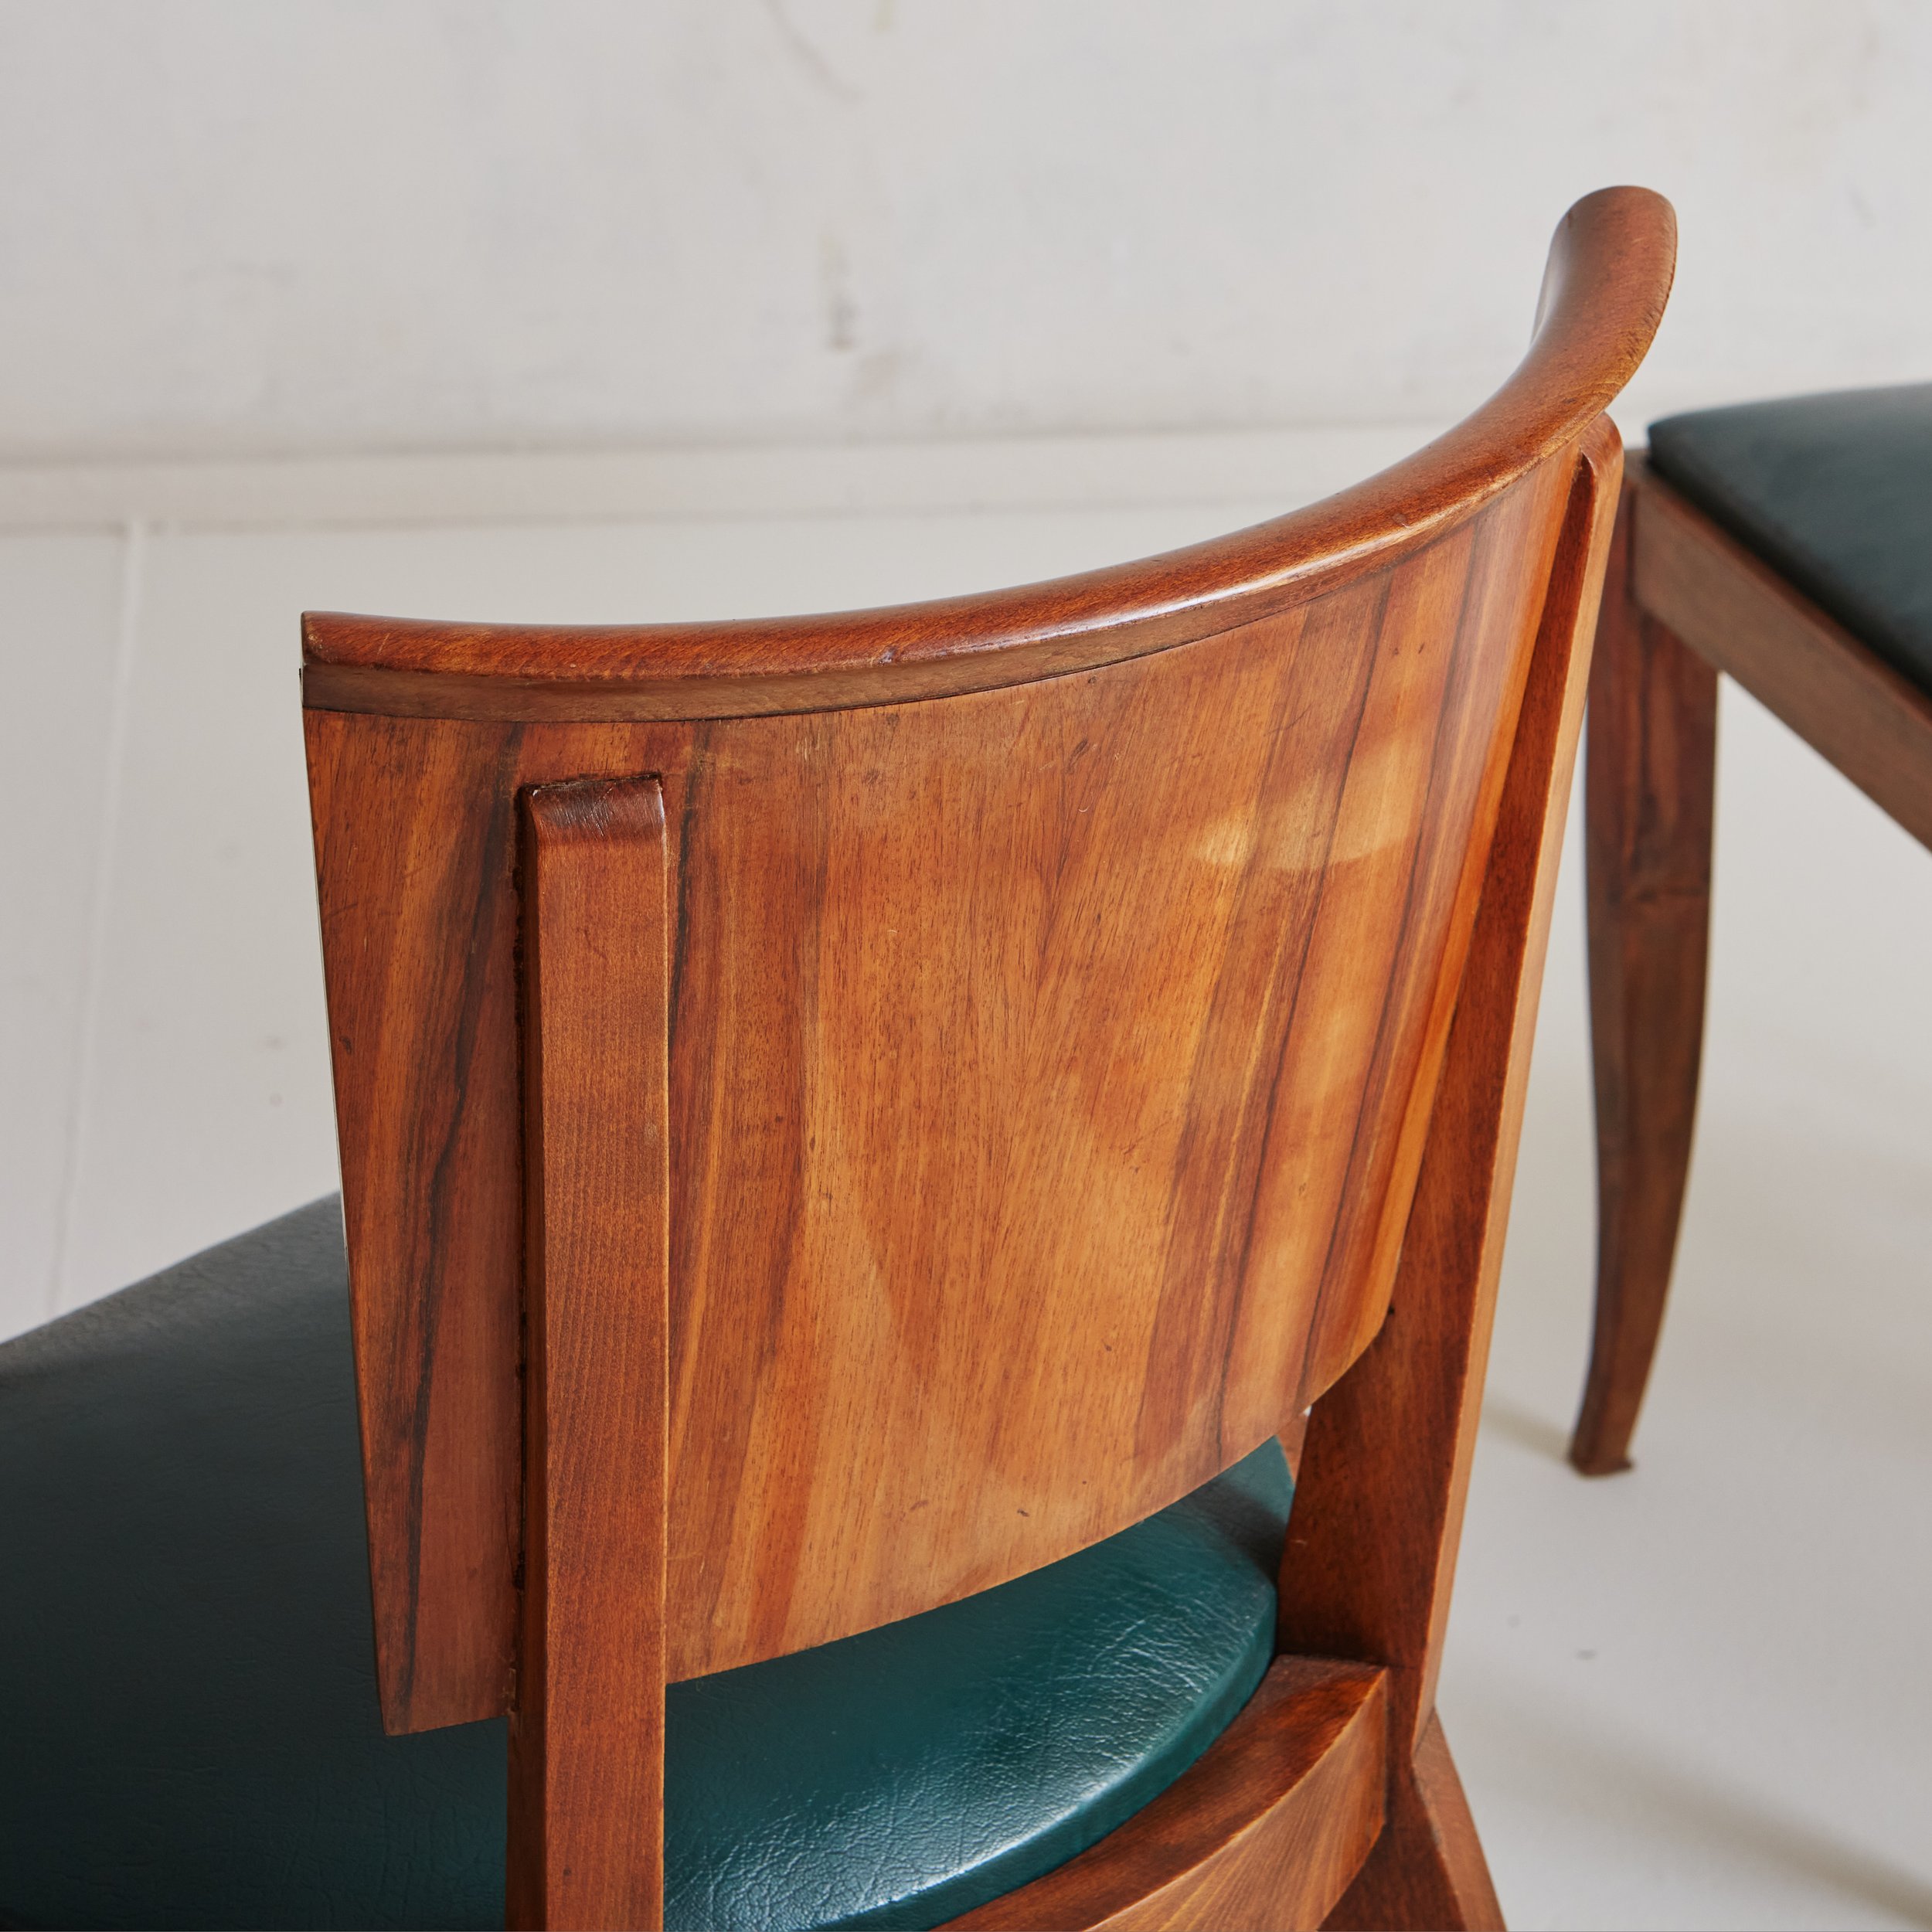 Set of 6 Mahogany + Green Leather Art Deco Dining Chairs, France 1940s —  South Loop Loft